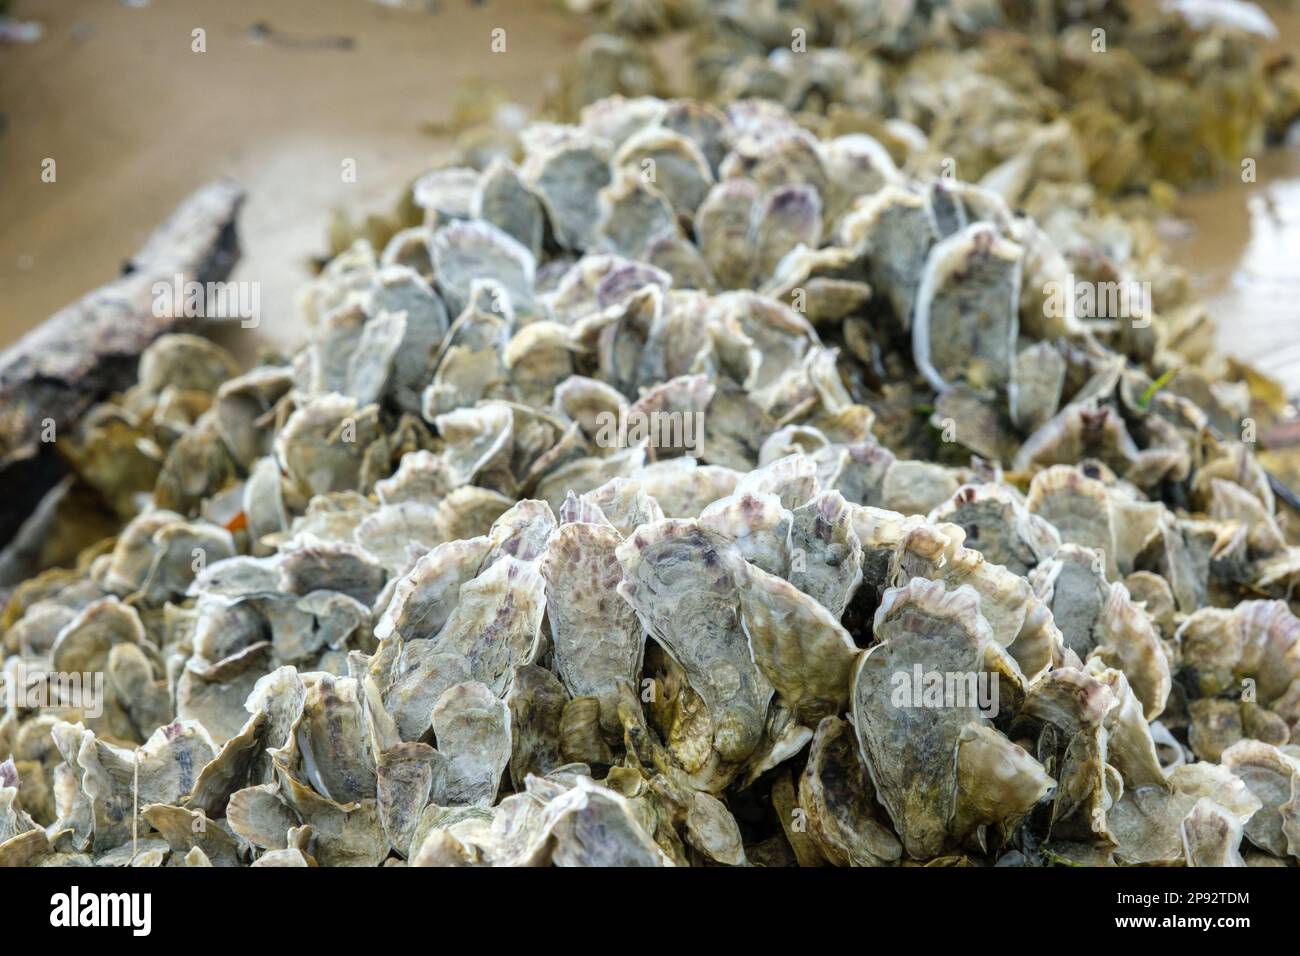 Oyster shells attached to a rock, closeup Stock Photo